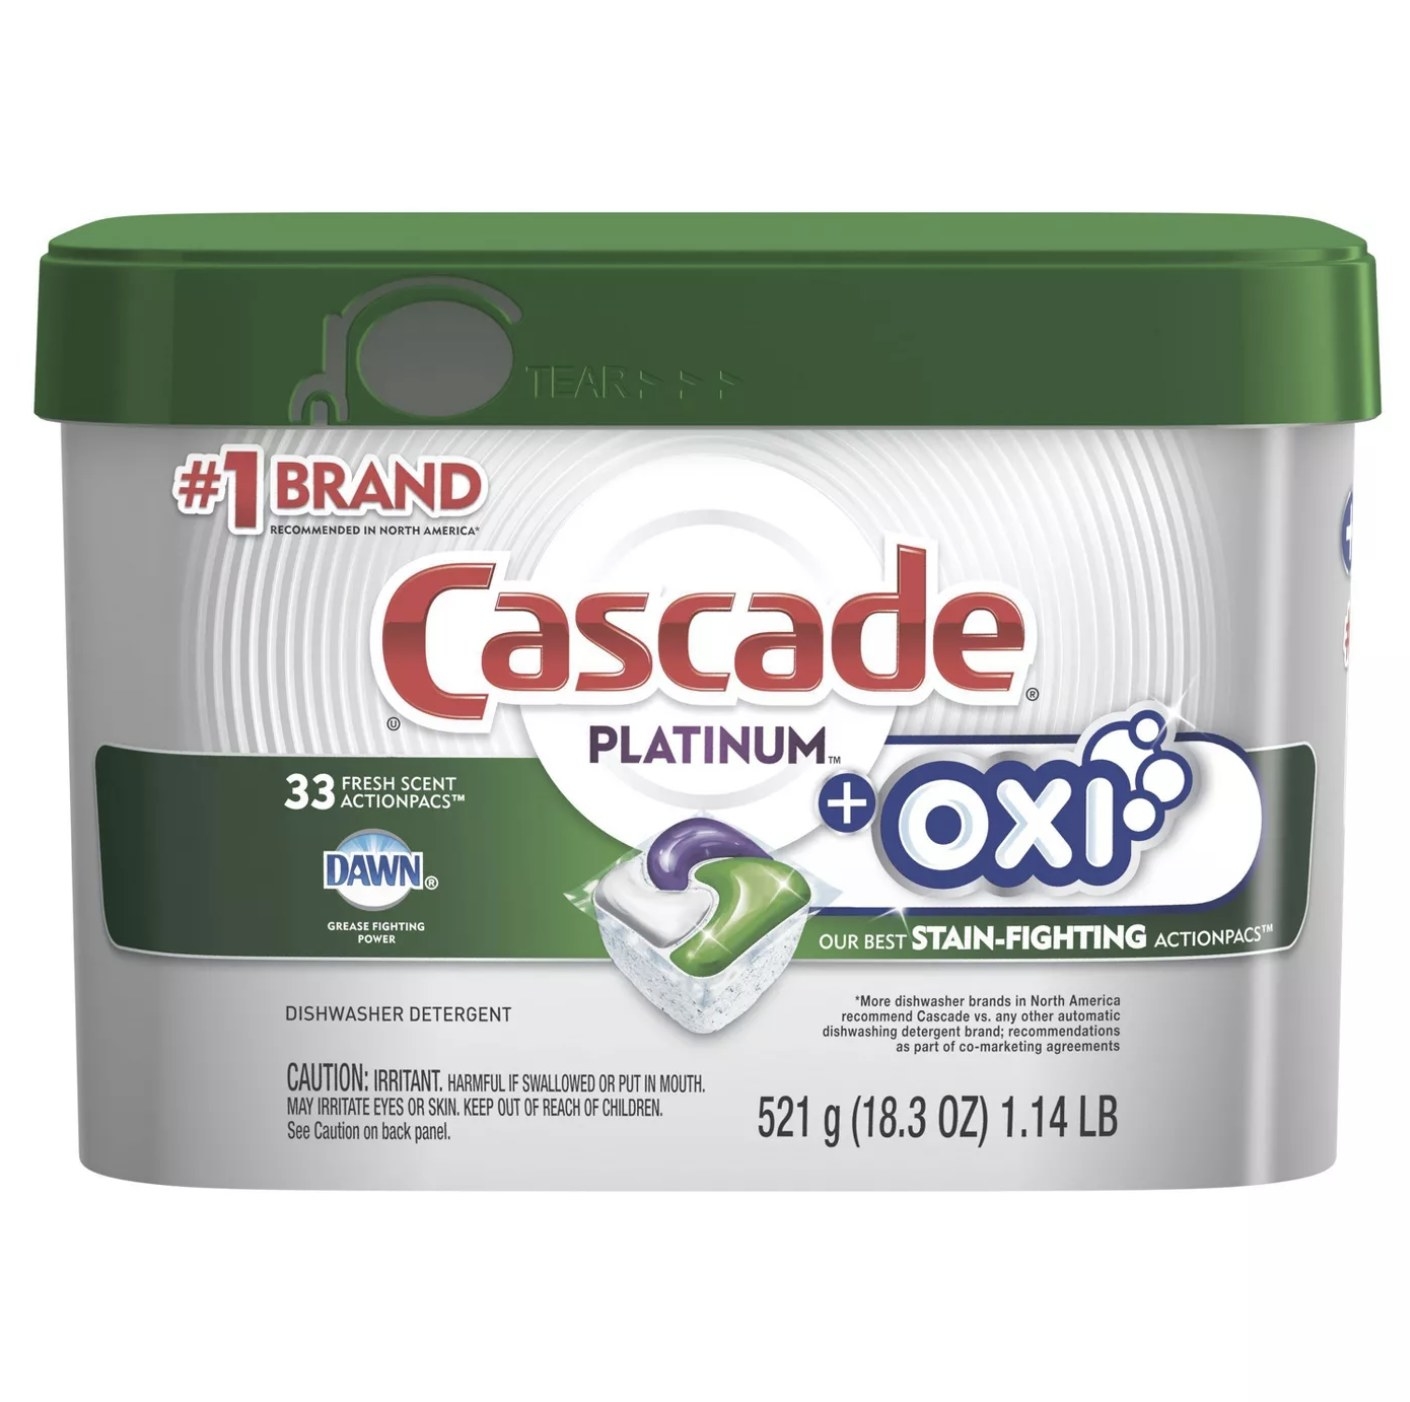 White and clear tub of Cascade Platinum + Oxi Stain-Fighting ActionPacs